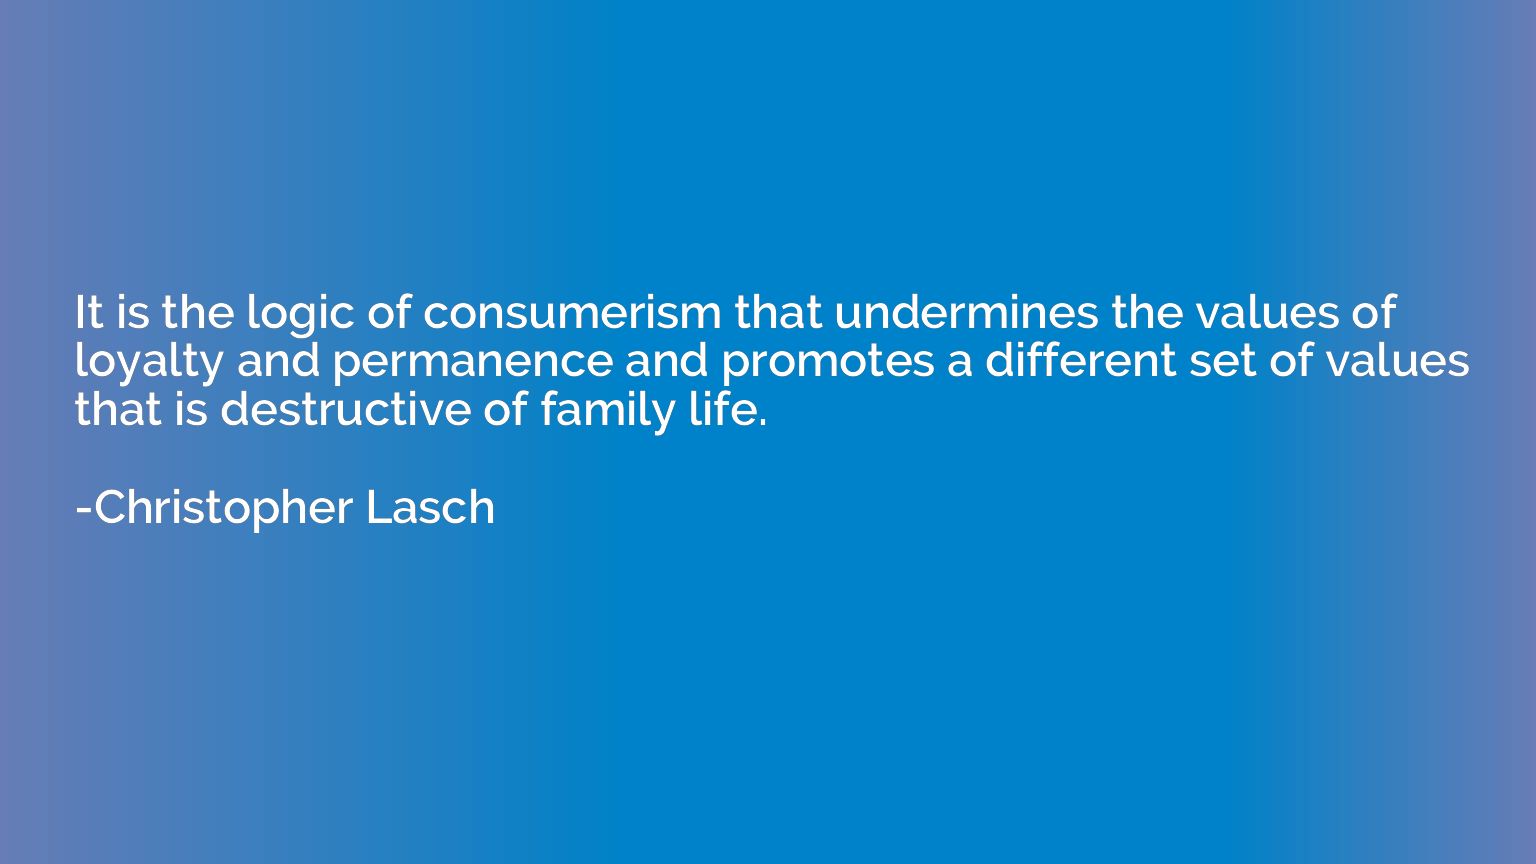 It is the logic of consumerism that undermines the values of